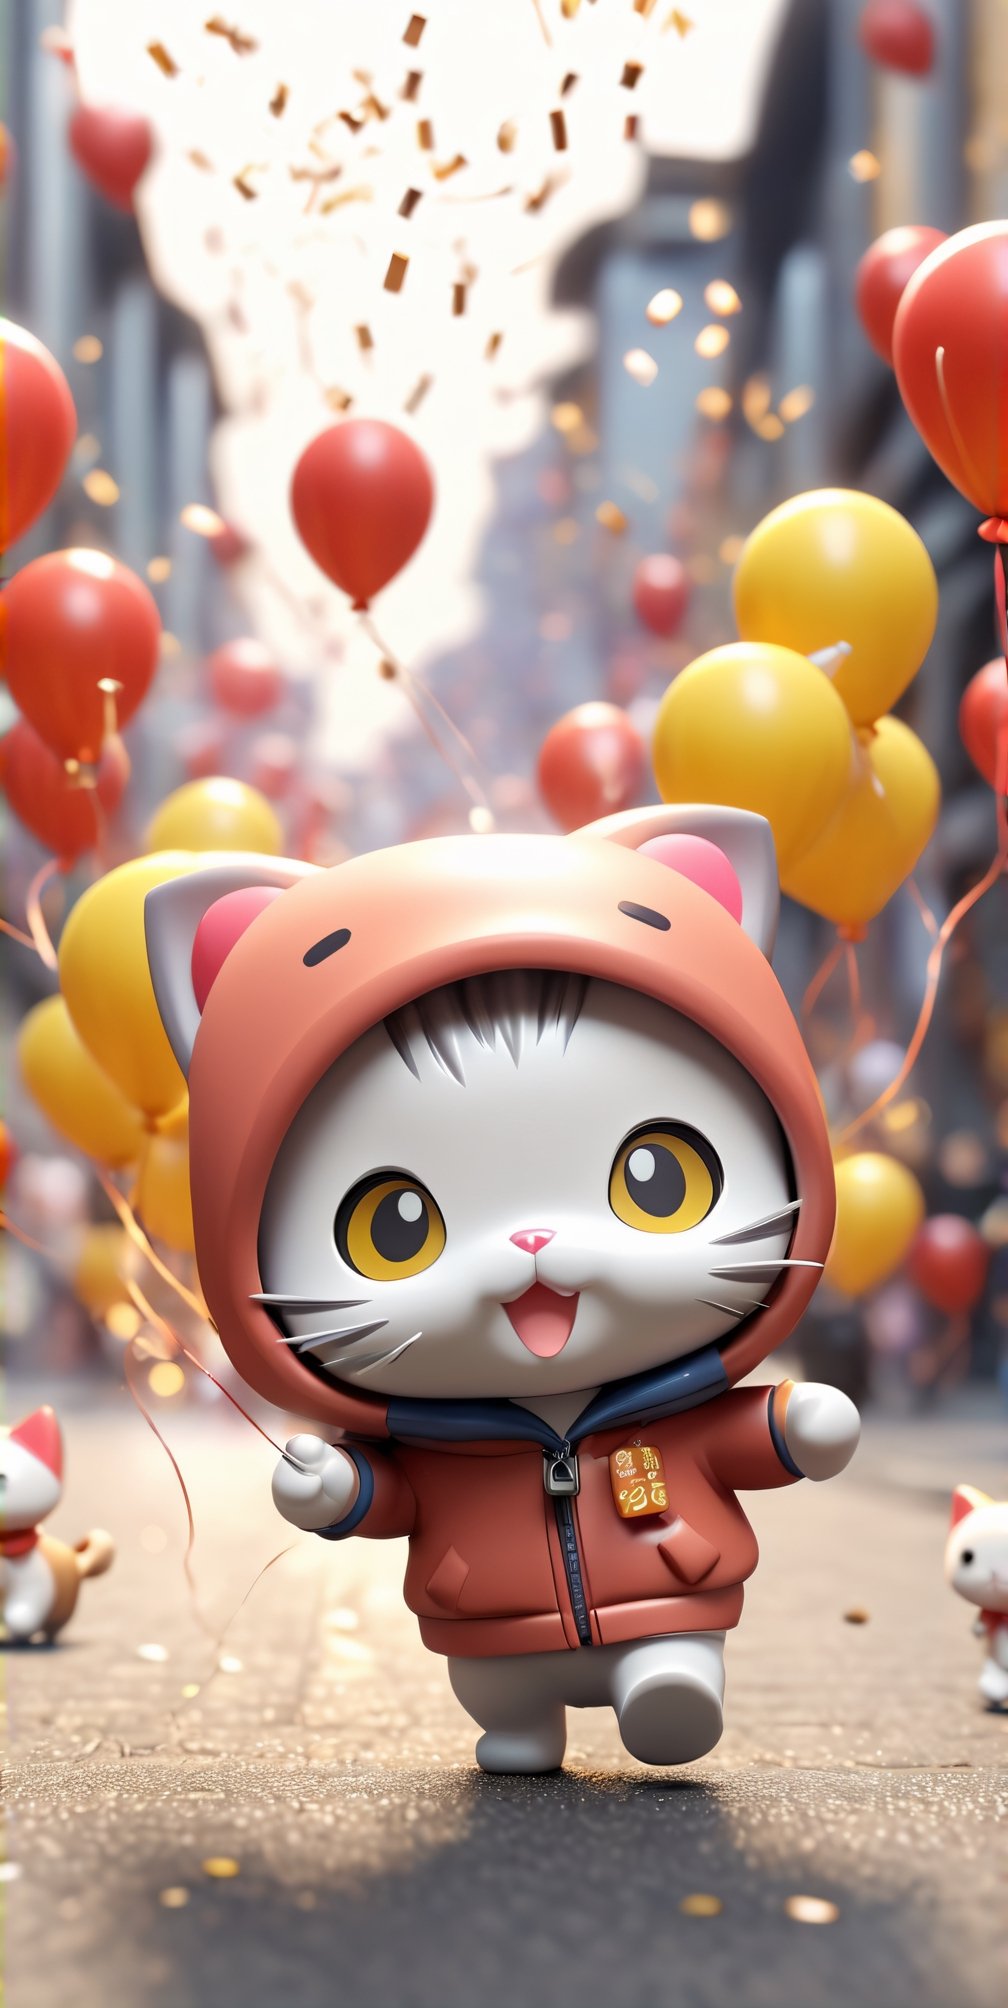 ((chibi style)), chibi cat in hoodie walking on busy street, new year setting, balloon and firecrackers, dynamic angle, depth of field, detail XL, closeup shot, finetune,ghibli,make_3d, flexis lucido chloting plastica reflex material